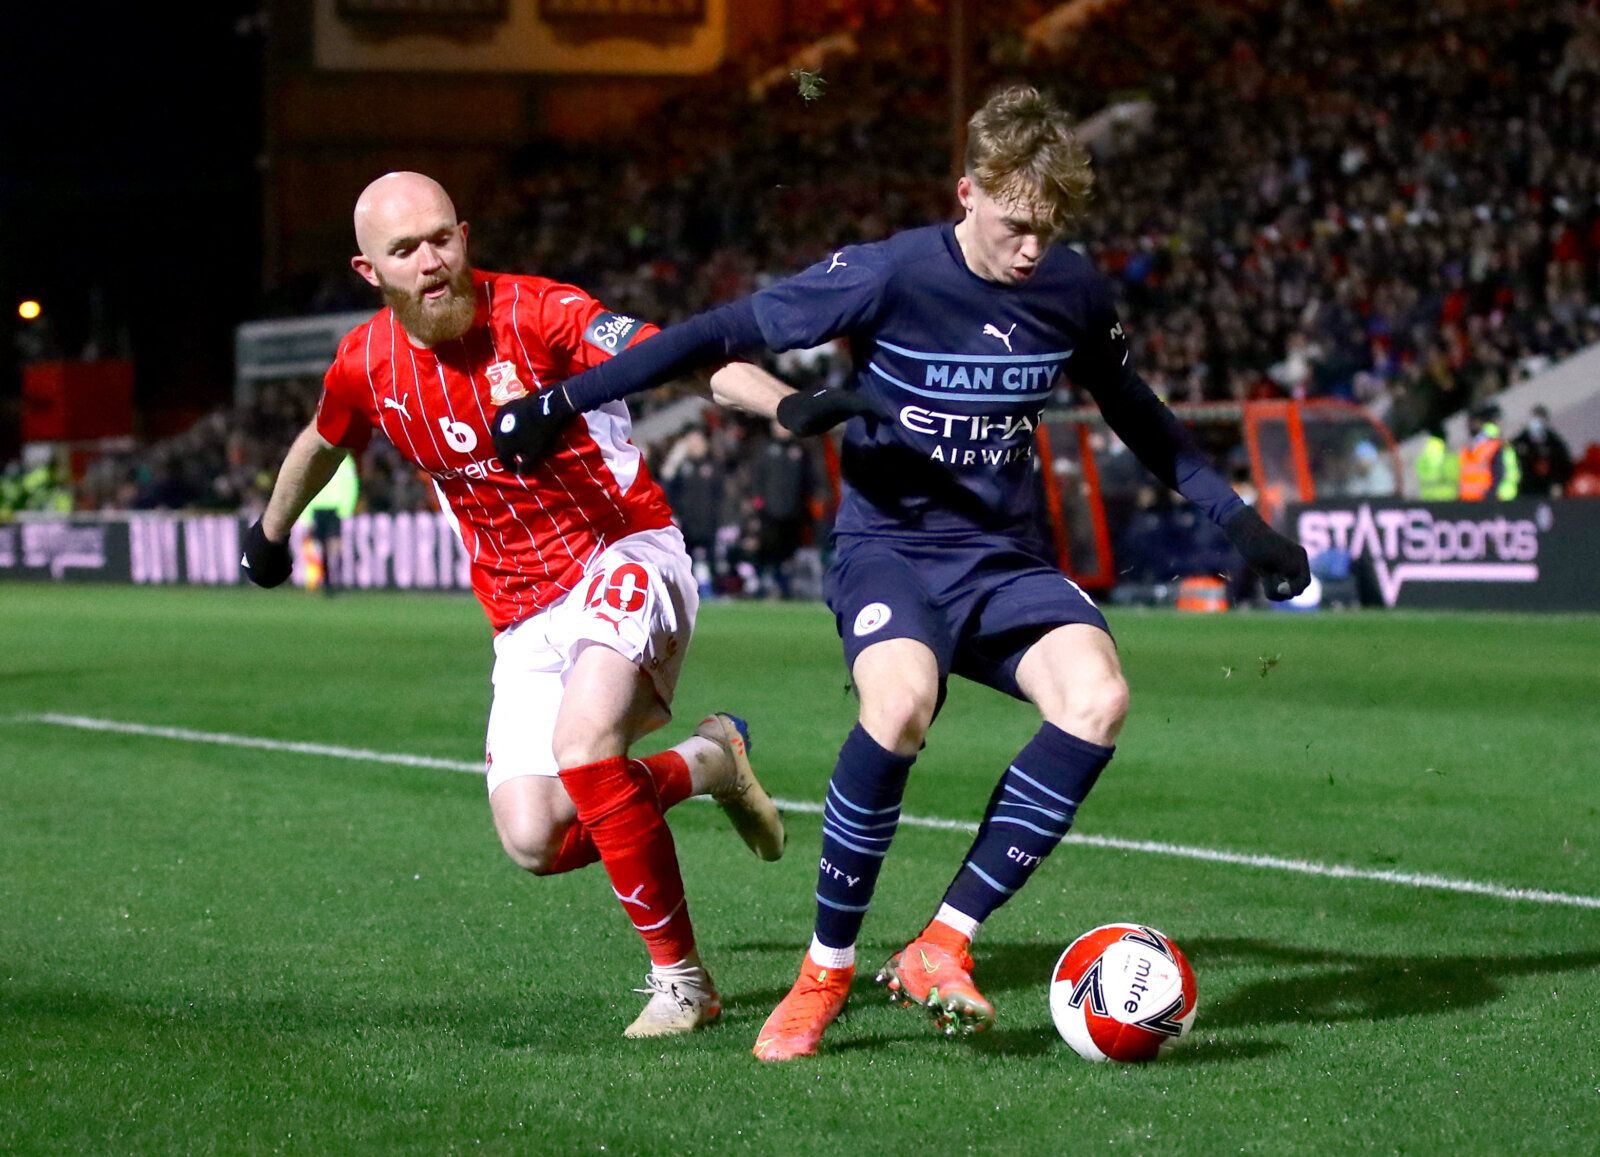 Soccer Football - FA Cup Third Round - Swindon Town v Manchester City - County Ground, Swindon, Britain - January 7, 2022 Manchester City's Cole Palmer in action with Swindon Town's Jonny Williams REUTERS/David Klein